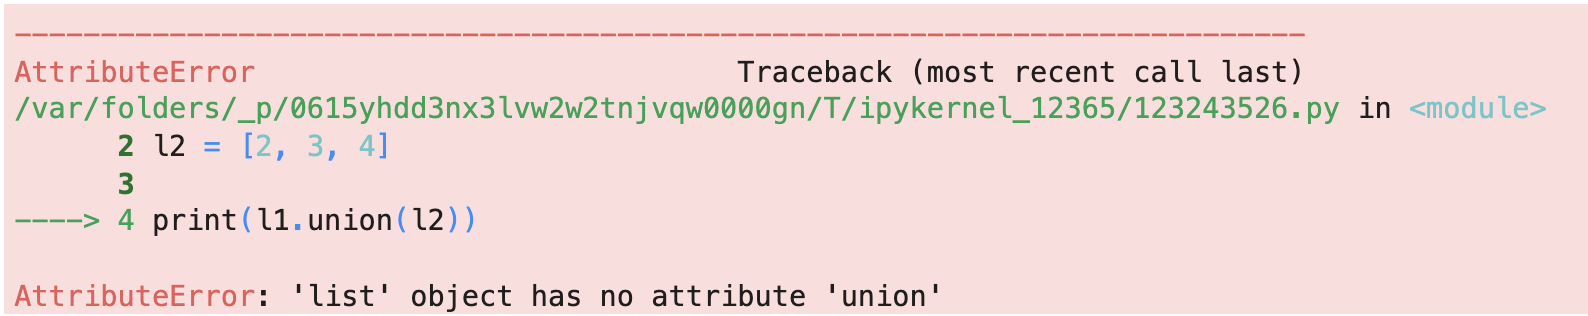 Image 5 - AttributeError when trying to call union() on a Python list (image by author)